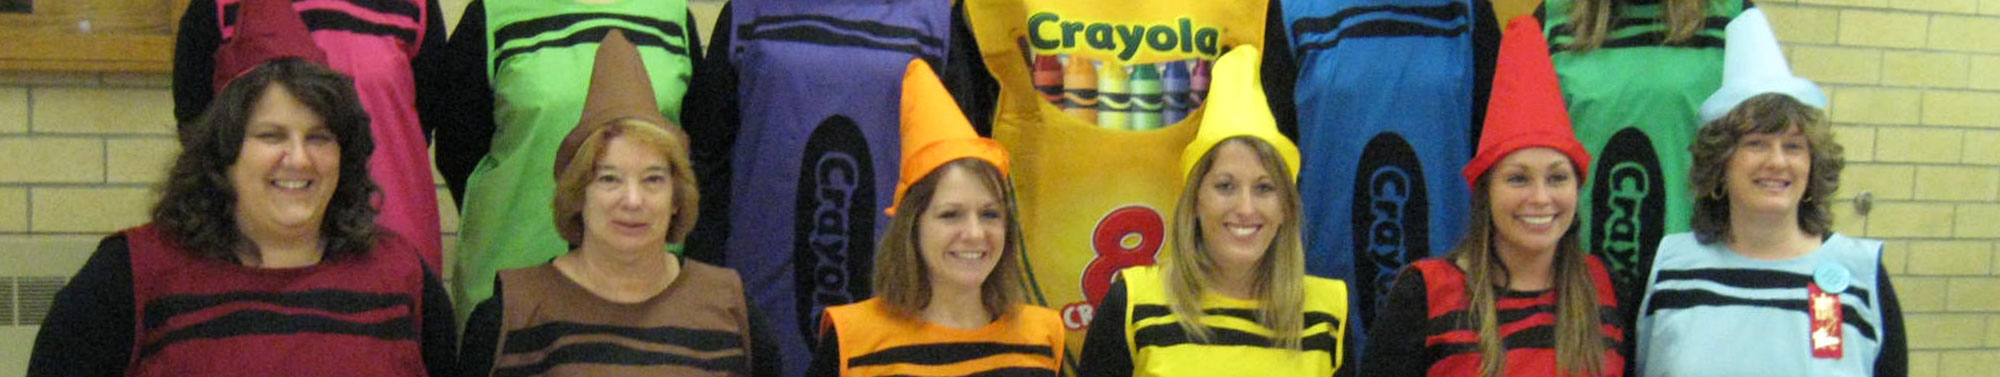 Teachers dressed up in crayon costumes